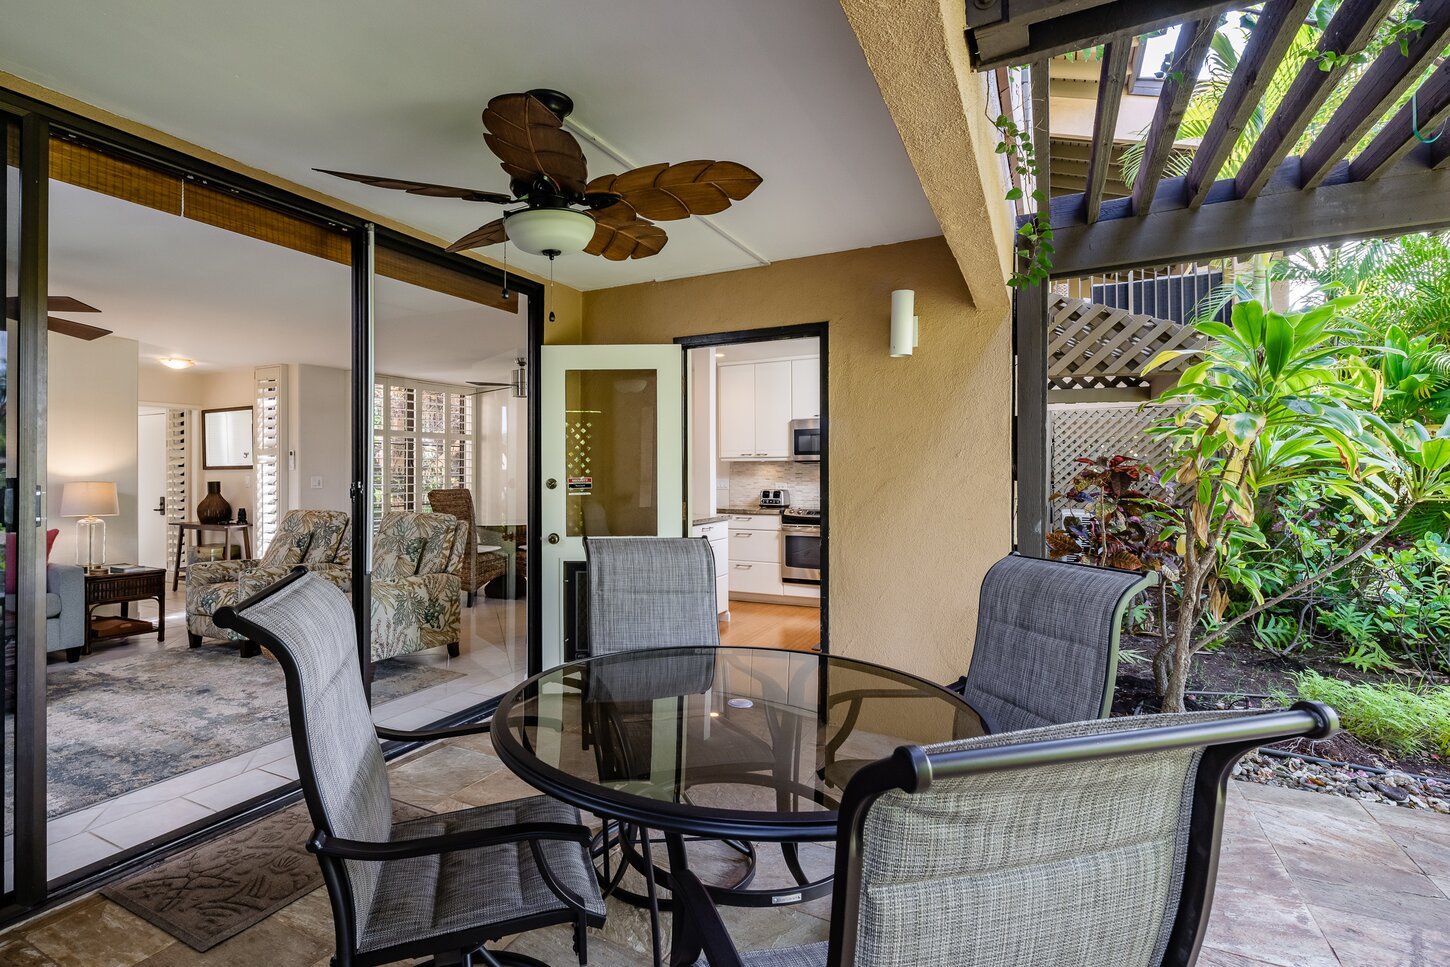 The living room and kitchen open onto the main lanai and lush private gardens.